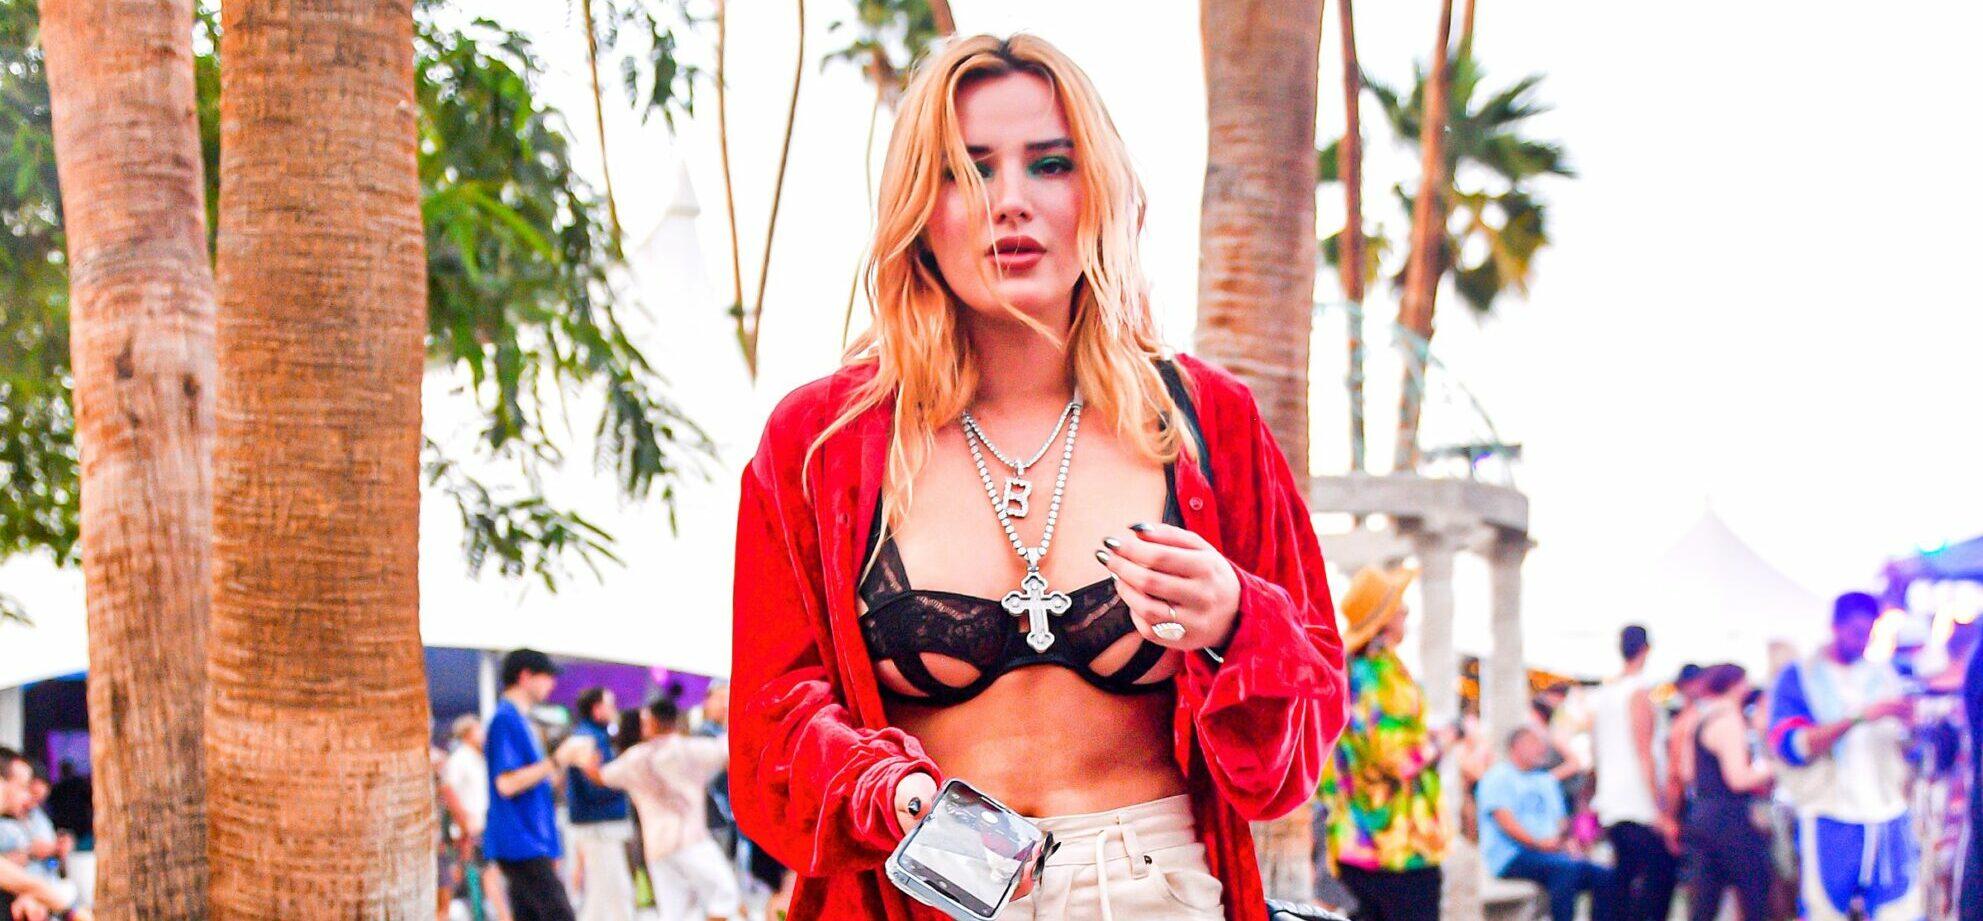 Bella Thorne Looks Sexy In Red While Enjoying Herself At Coachella in Indio CA